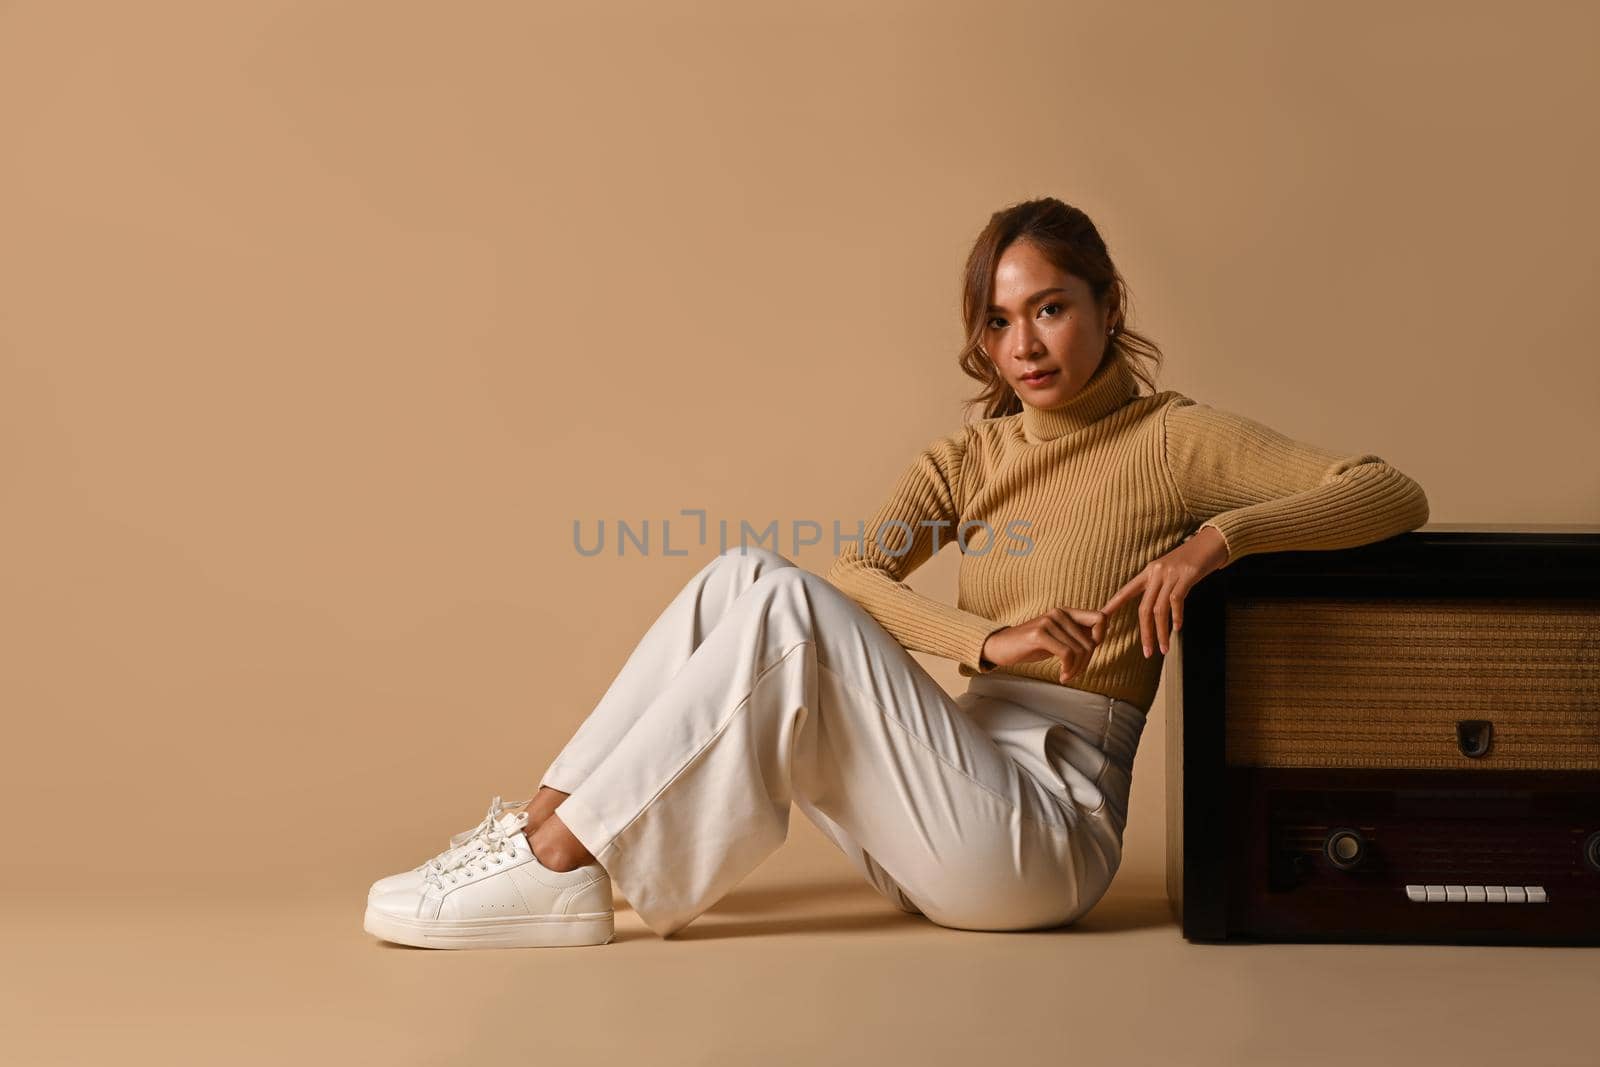 Fashion studio photo of young woman posing near a vintage radio over on beige background. Autumn fashion and beauty concept.